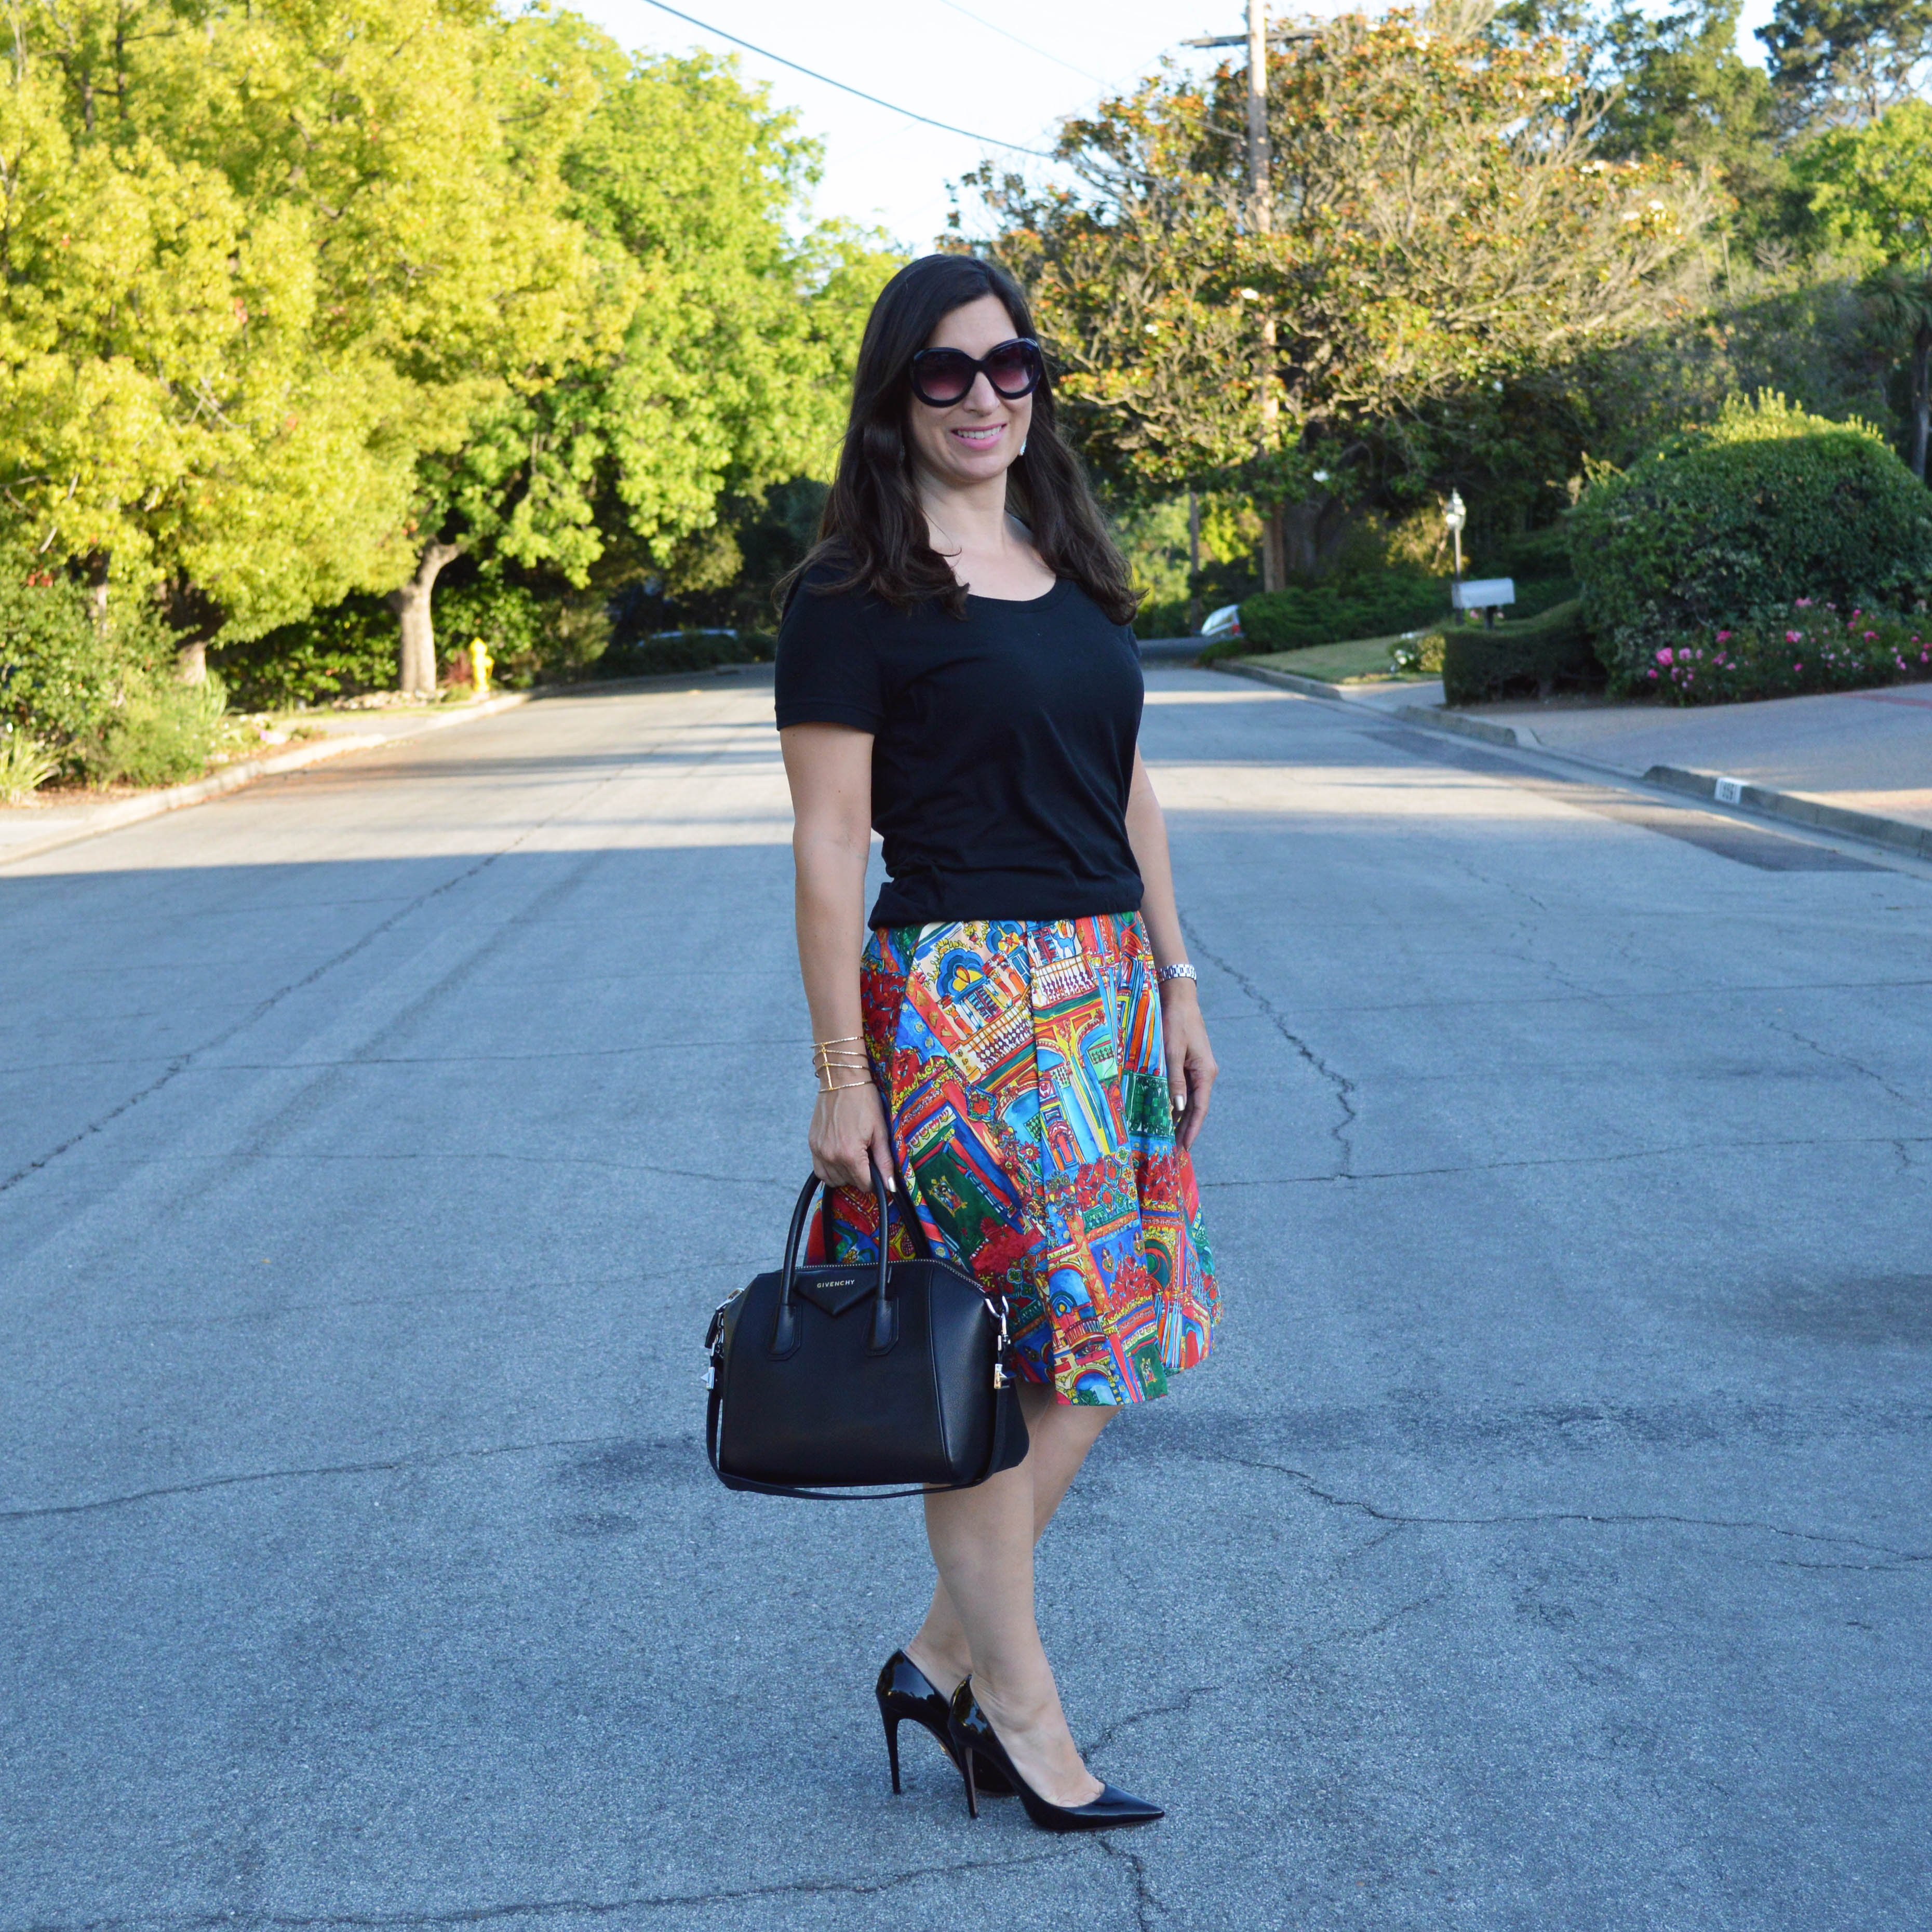 Printed skirt with a painted story – Bay Area Fashionista